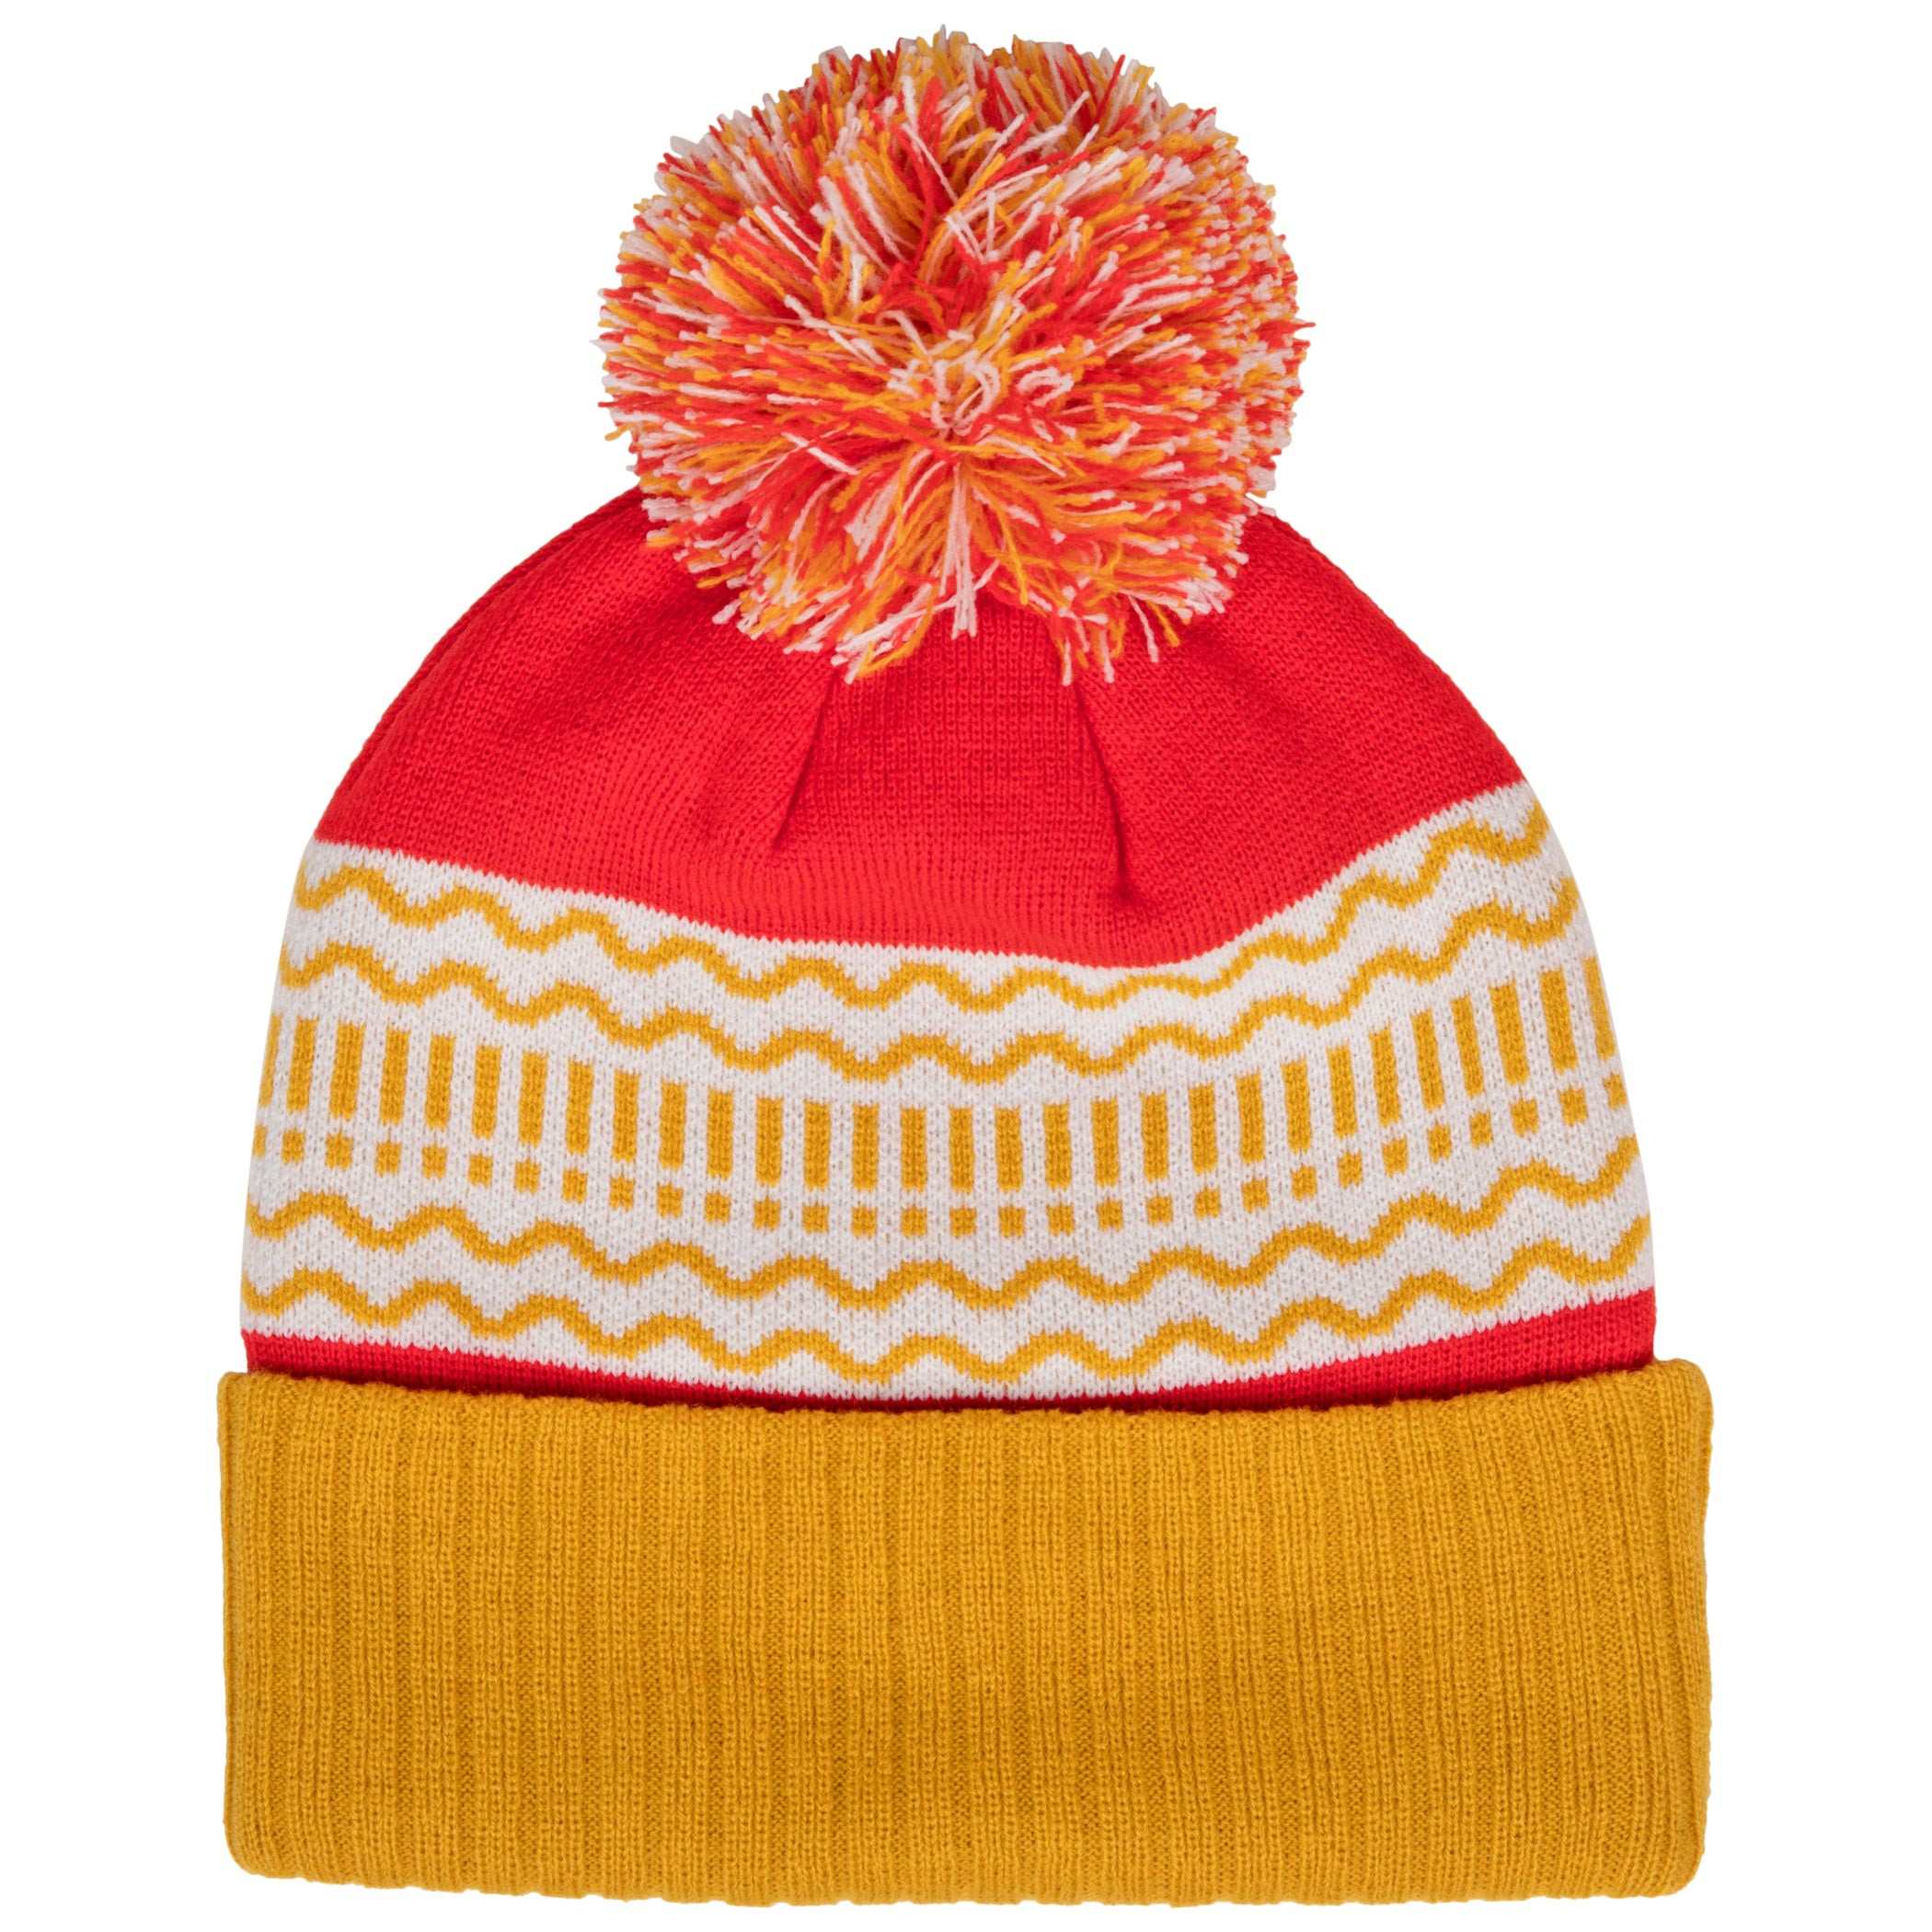 Cup Noodles Intarsia Woven Pom Cuffed Beanie